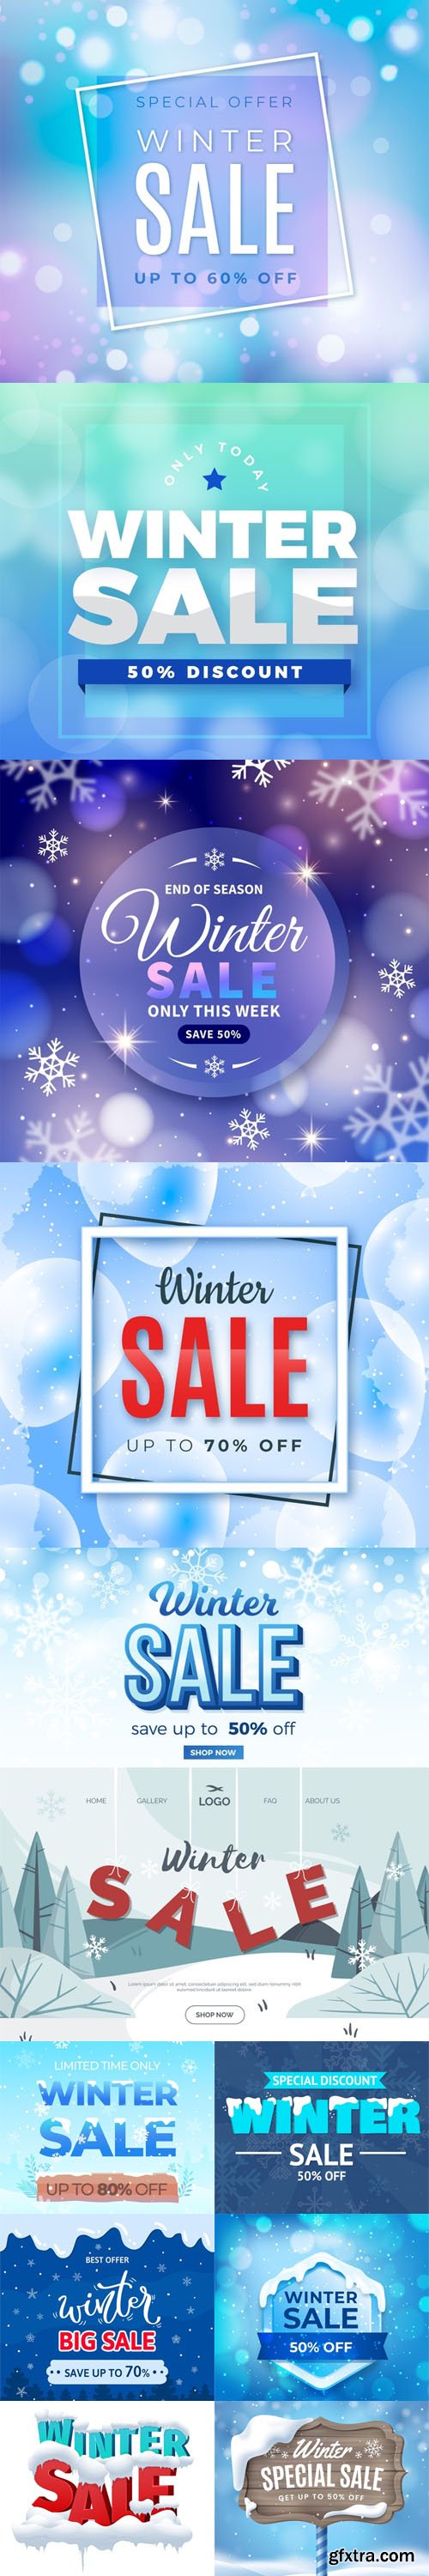 12 Winter Sales Backgrounds Collection in Vector